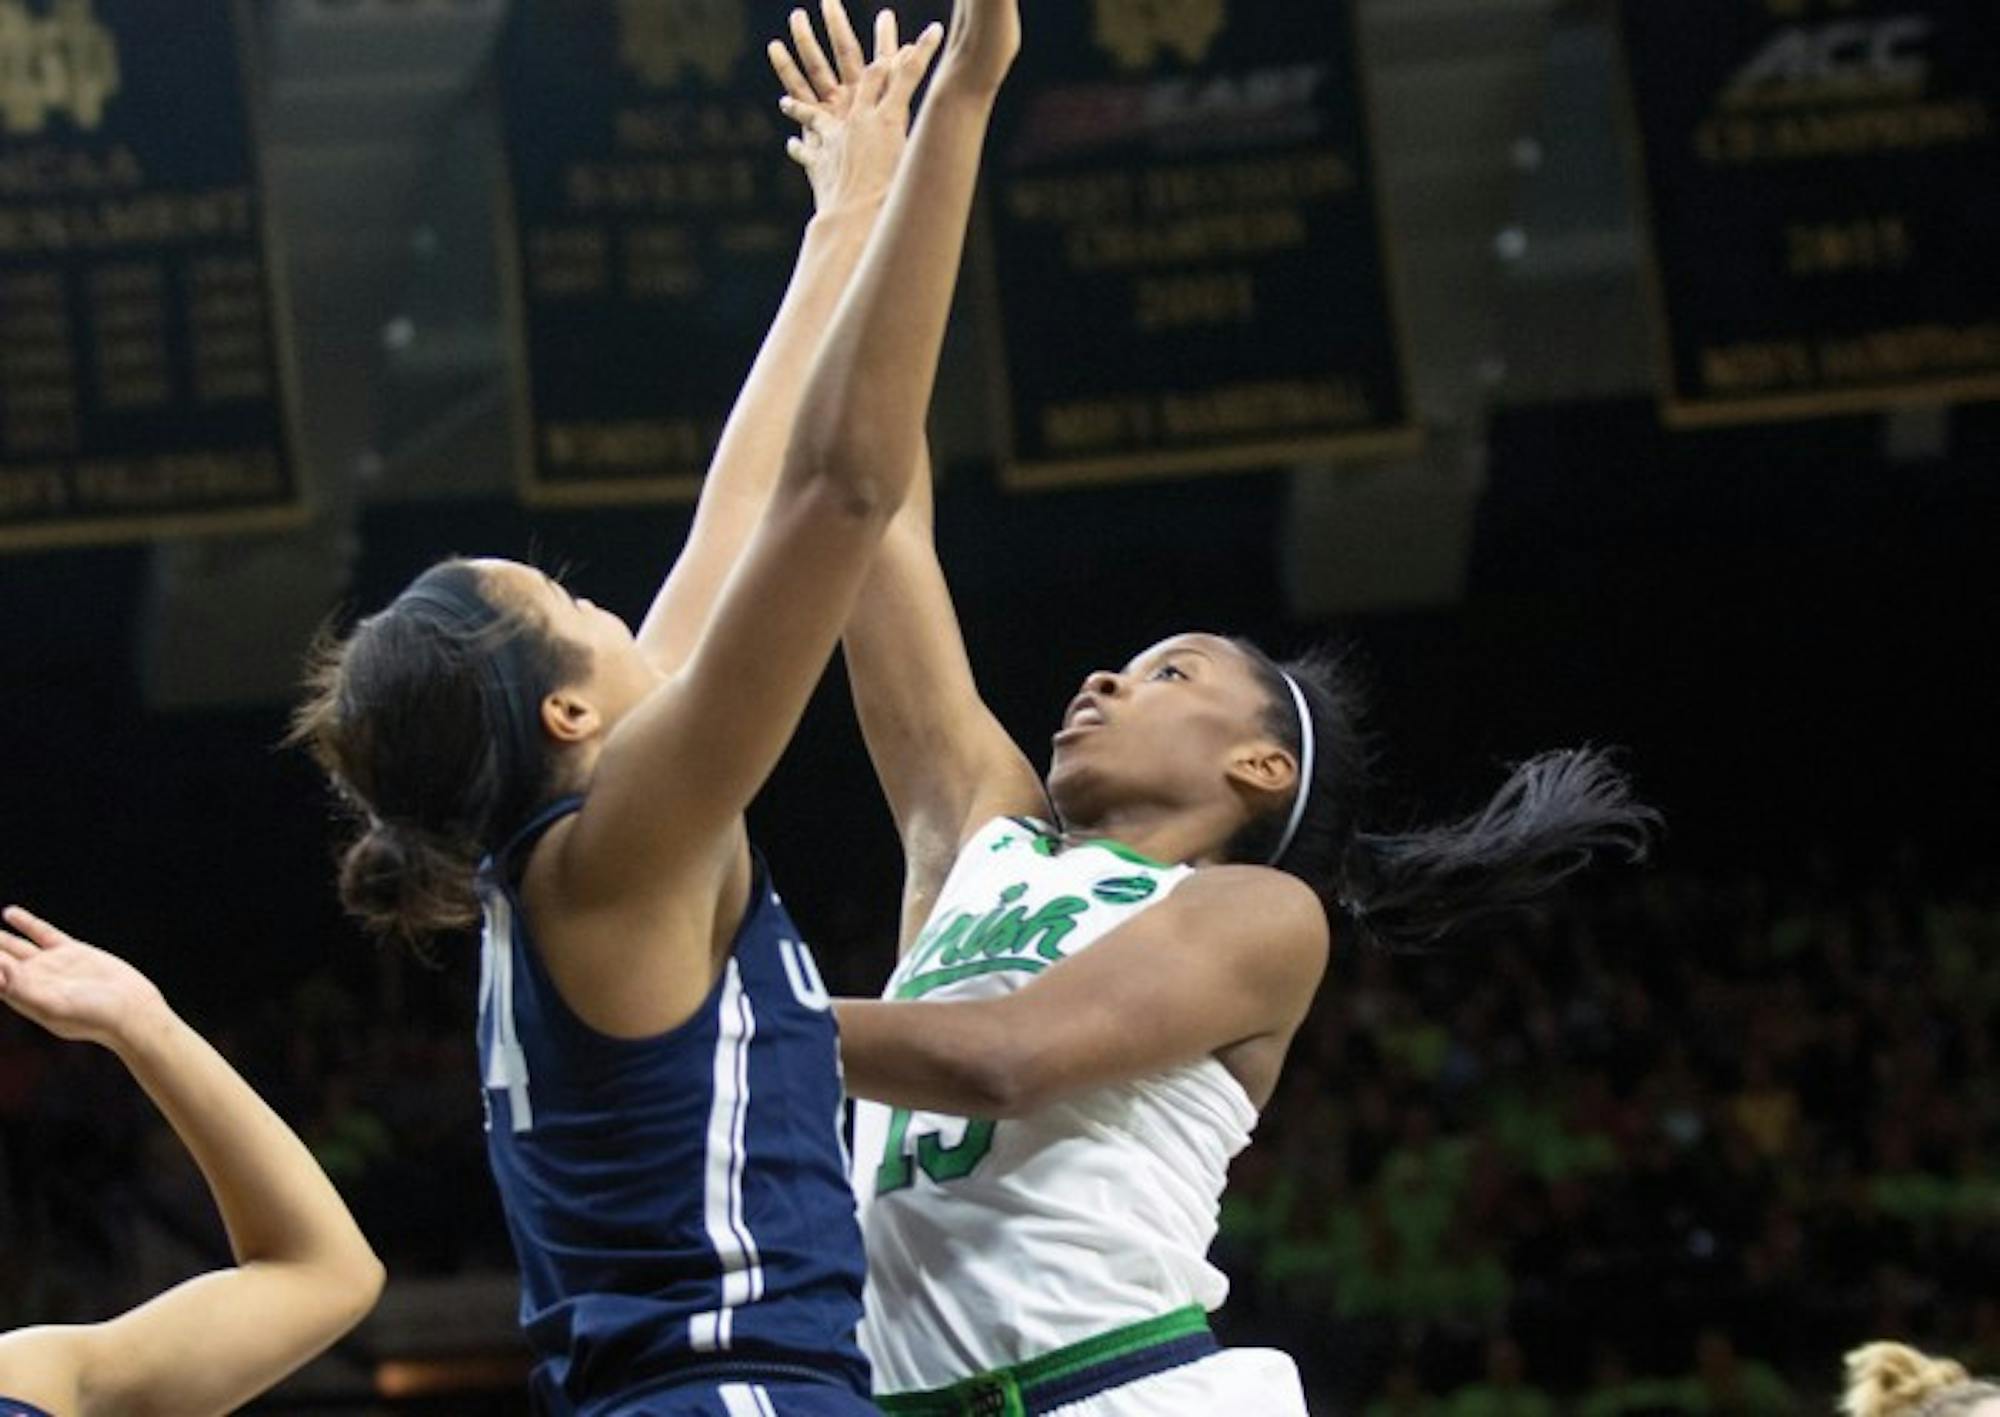 Irish senior guard Lindsay Allen floats the ball over a Huskies defender during Notre Dame’s 72-61 loss to UConn on Dec. 7 at Purcell Pavilion.